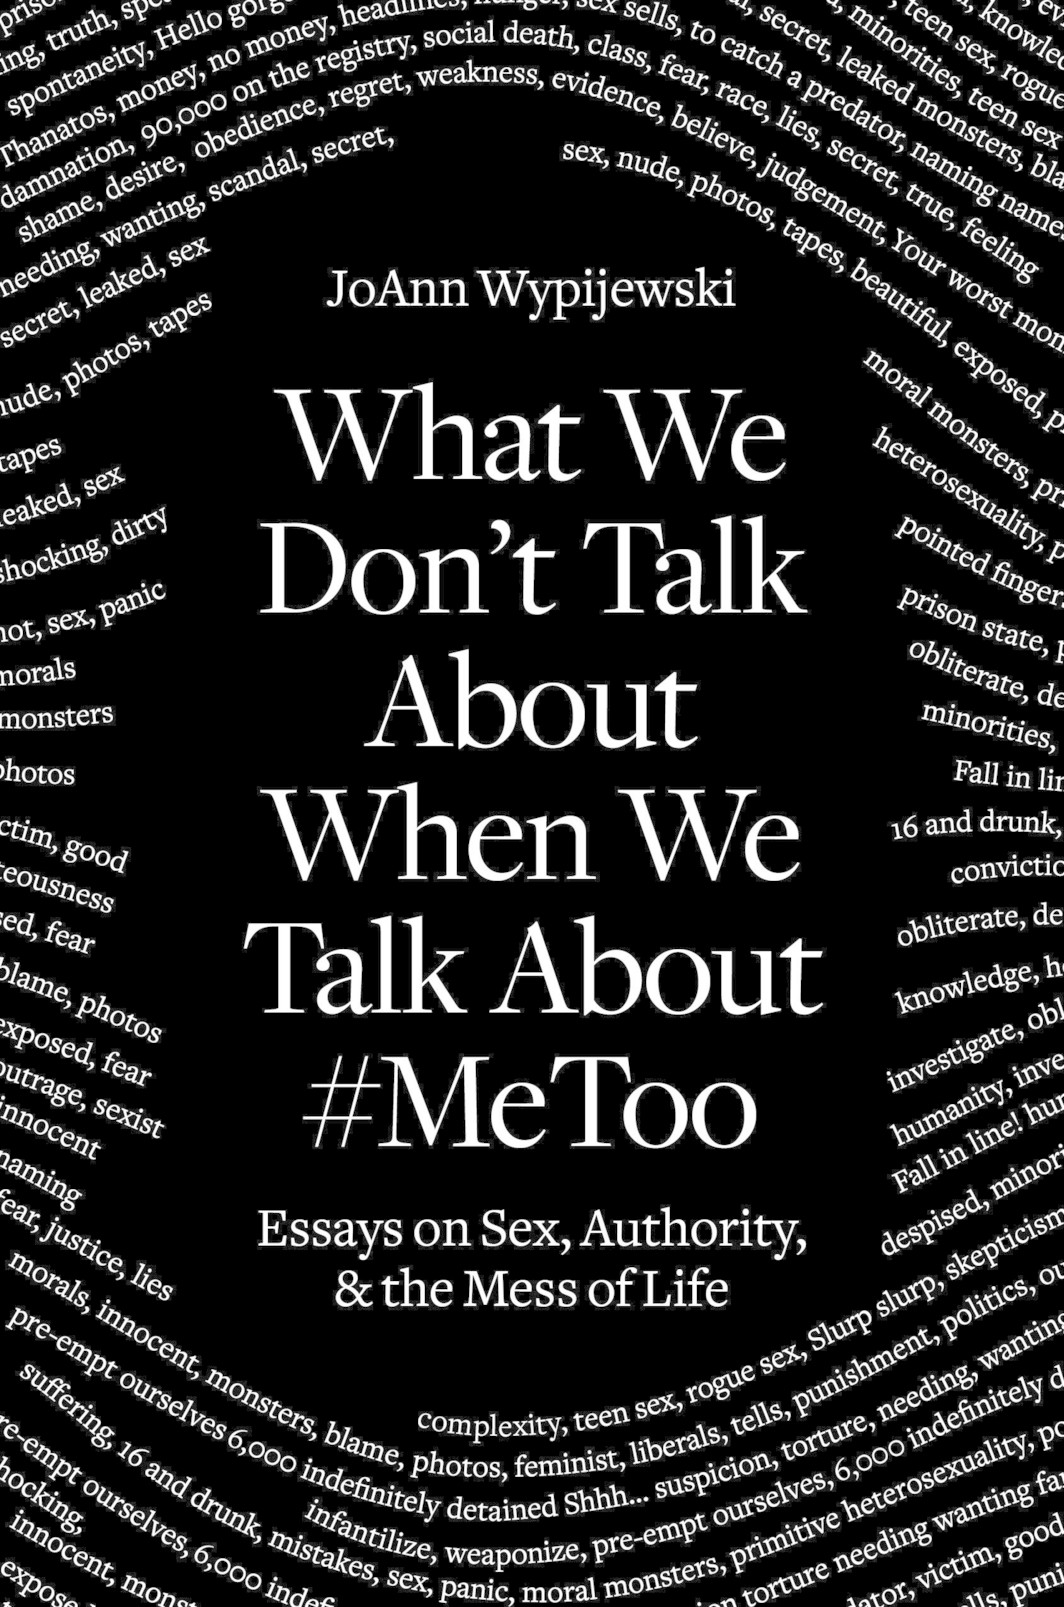 The cover of What We Don't Talk About When We Talk About #MeToo: Essays on Sex, Authority, and the Mess of Life